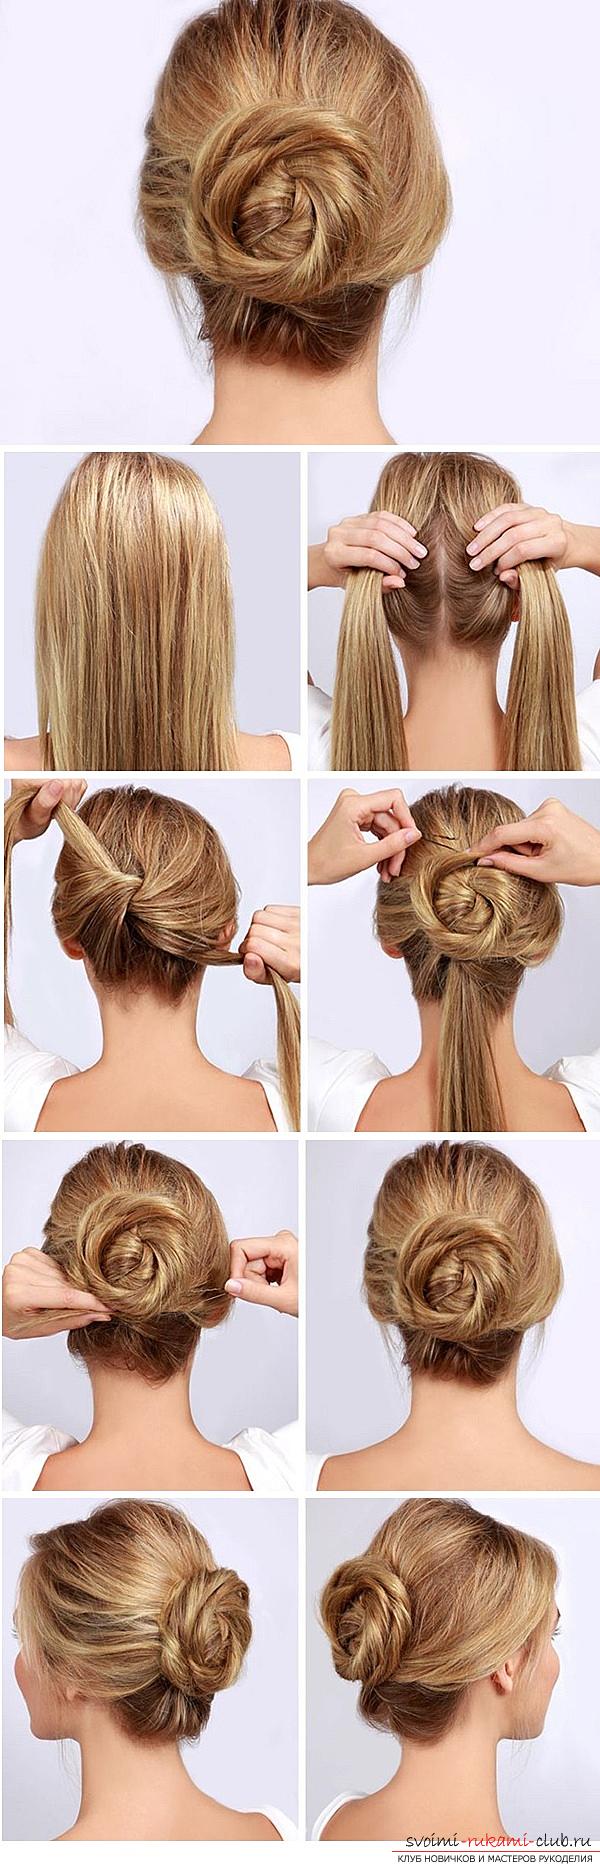 How to beautifully and quickly braid long hair at home with their own hands, step by step photos and description. Photo # 2